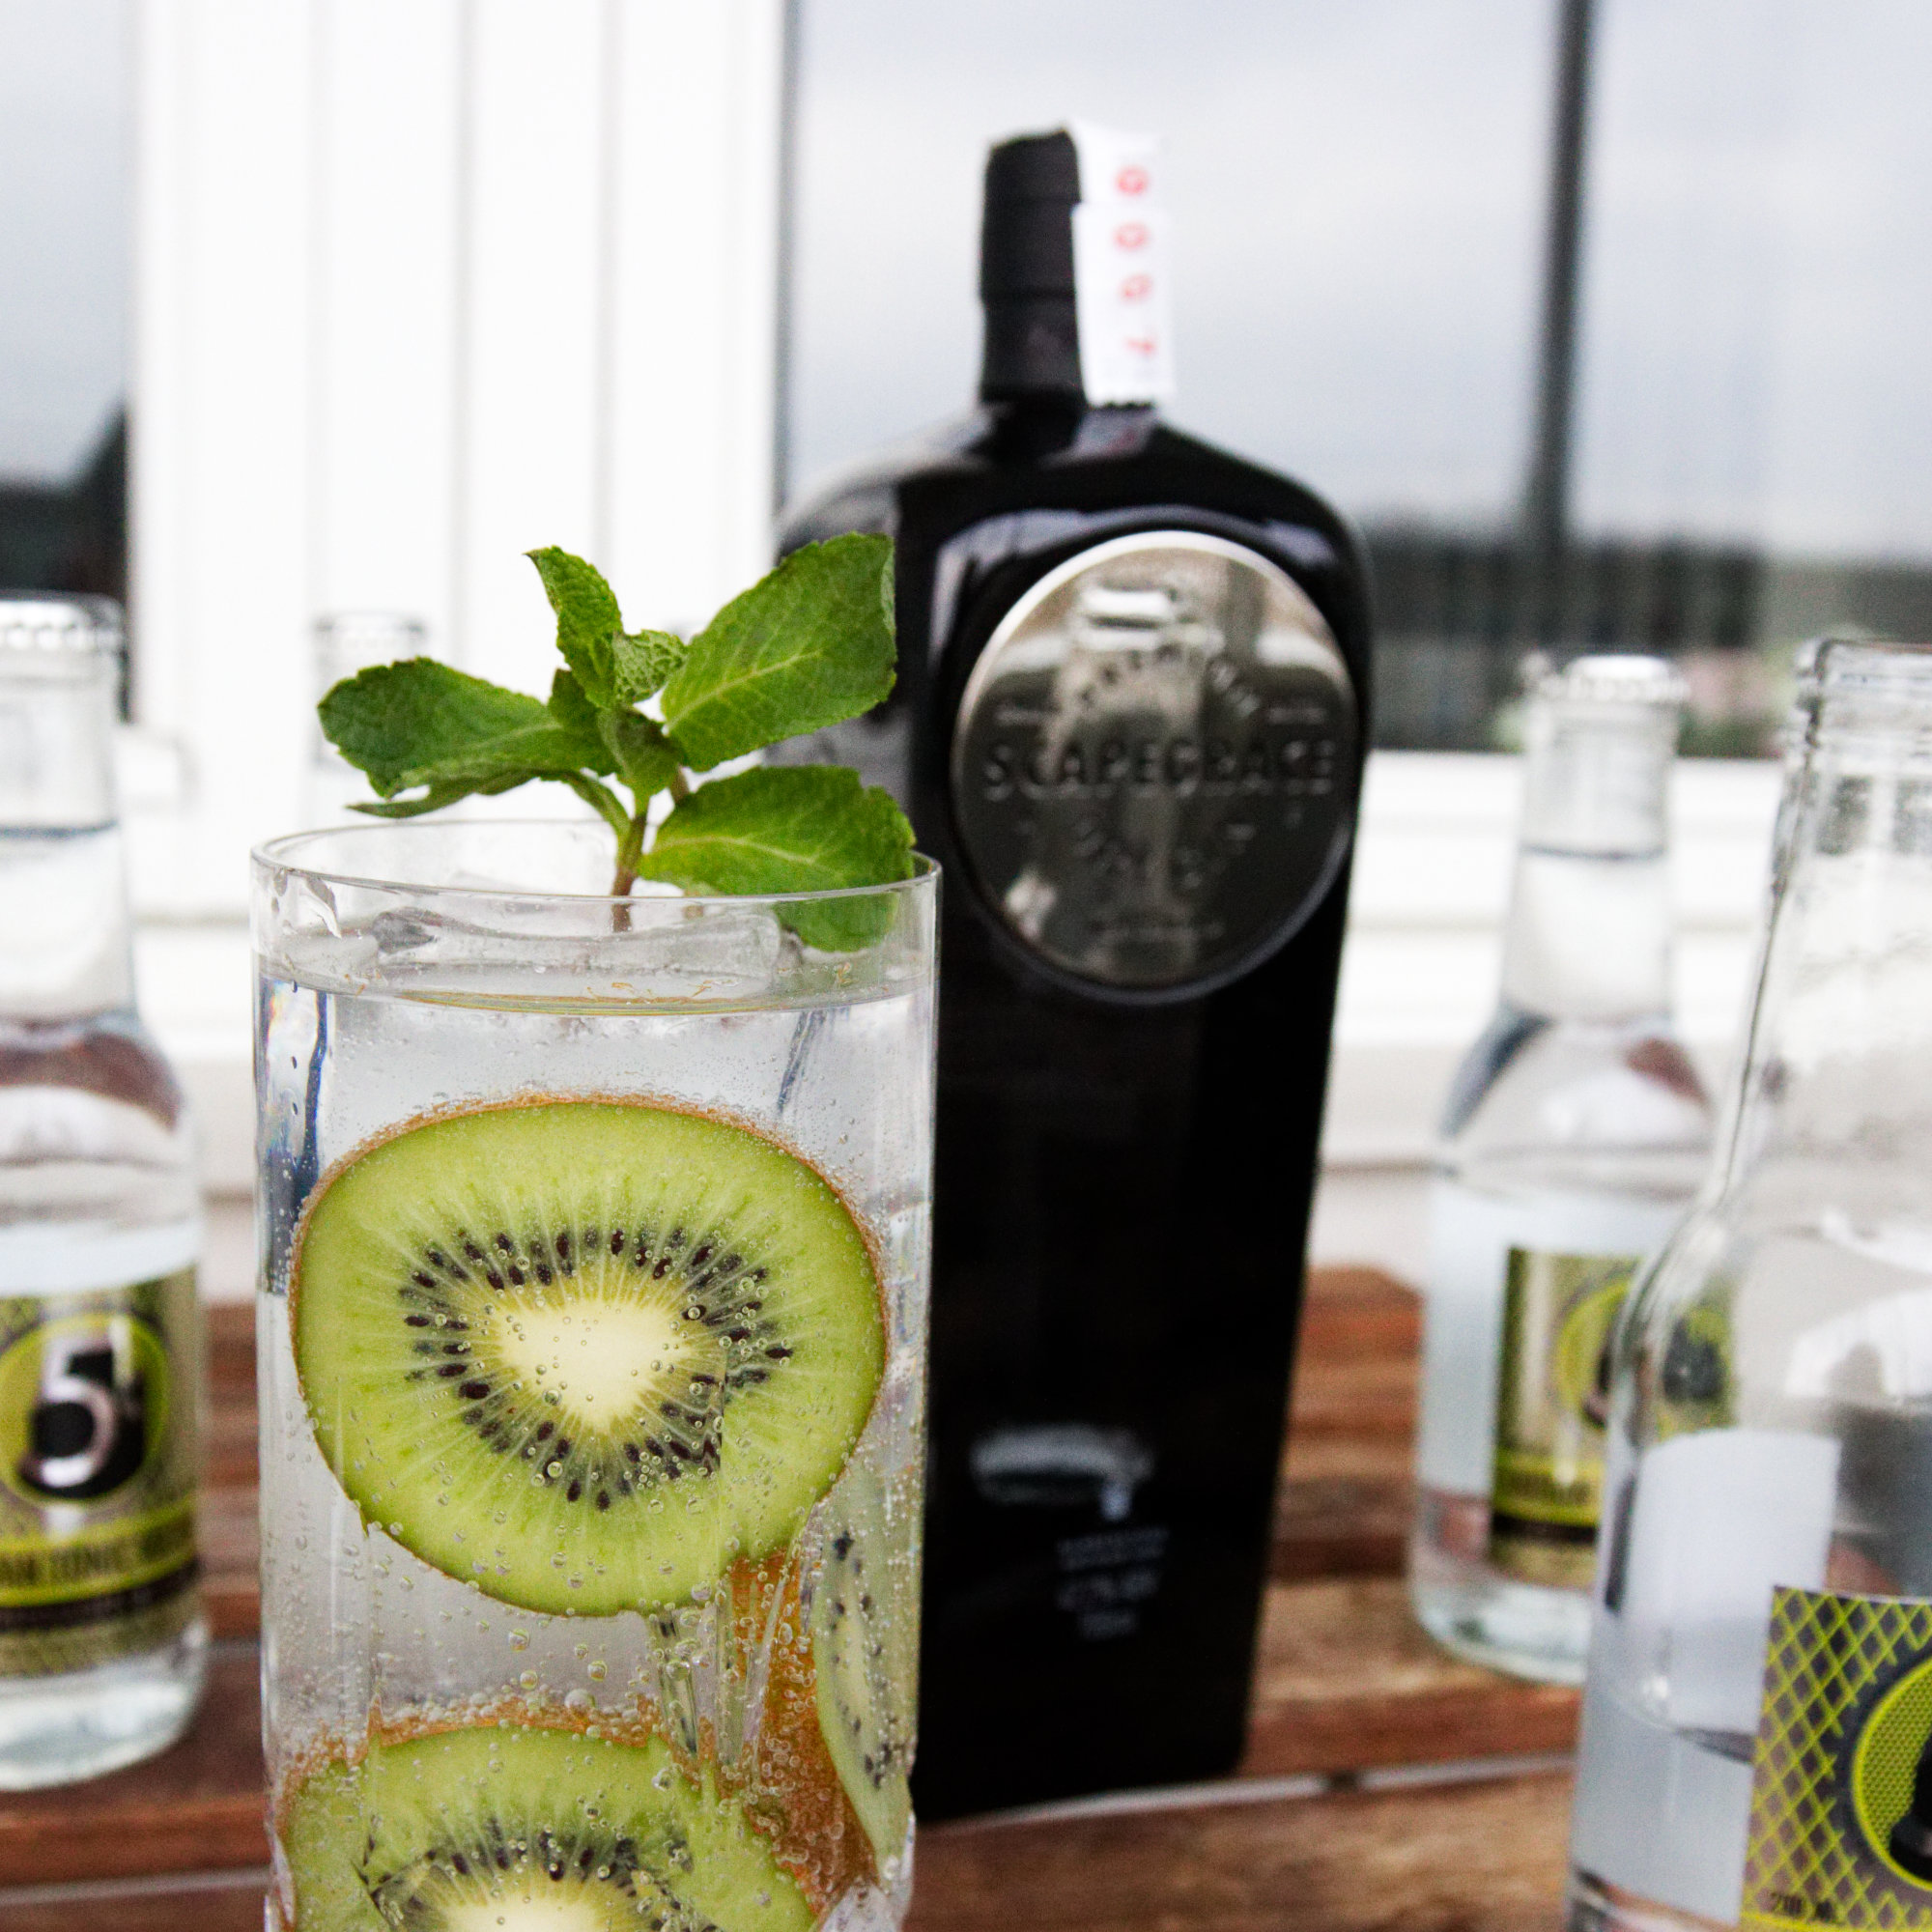 Scapegrace G&T with kiwi and mint